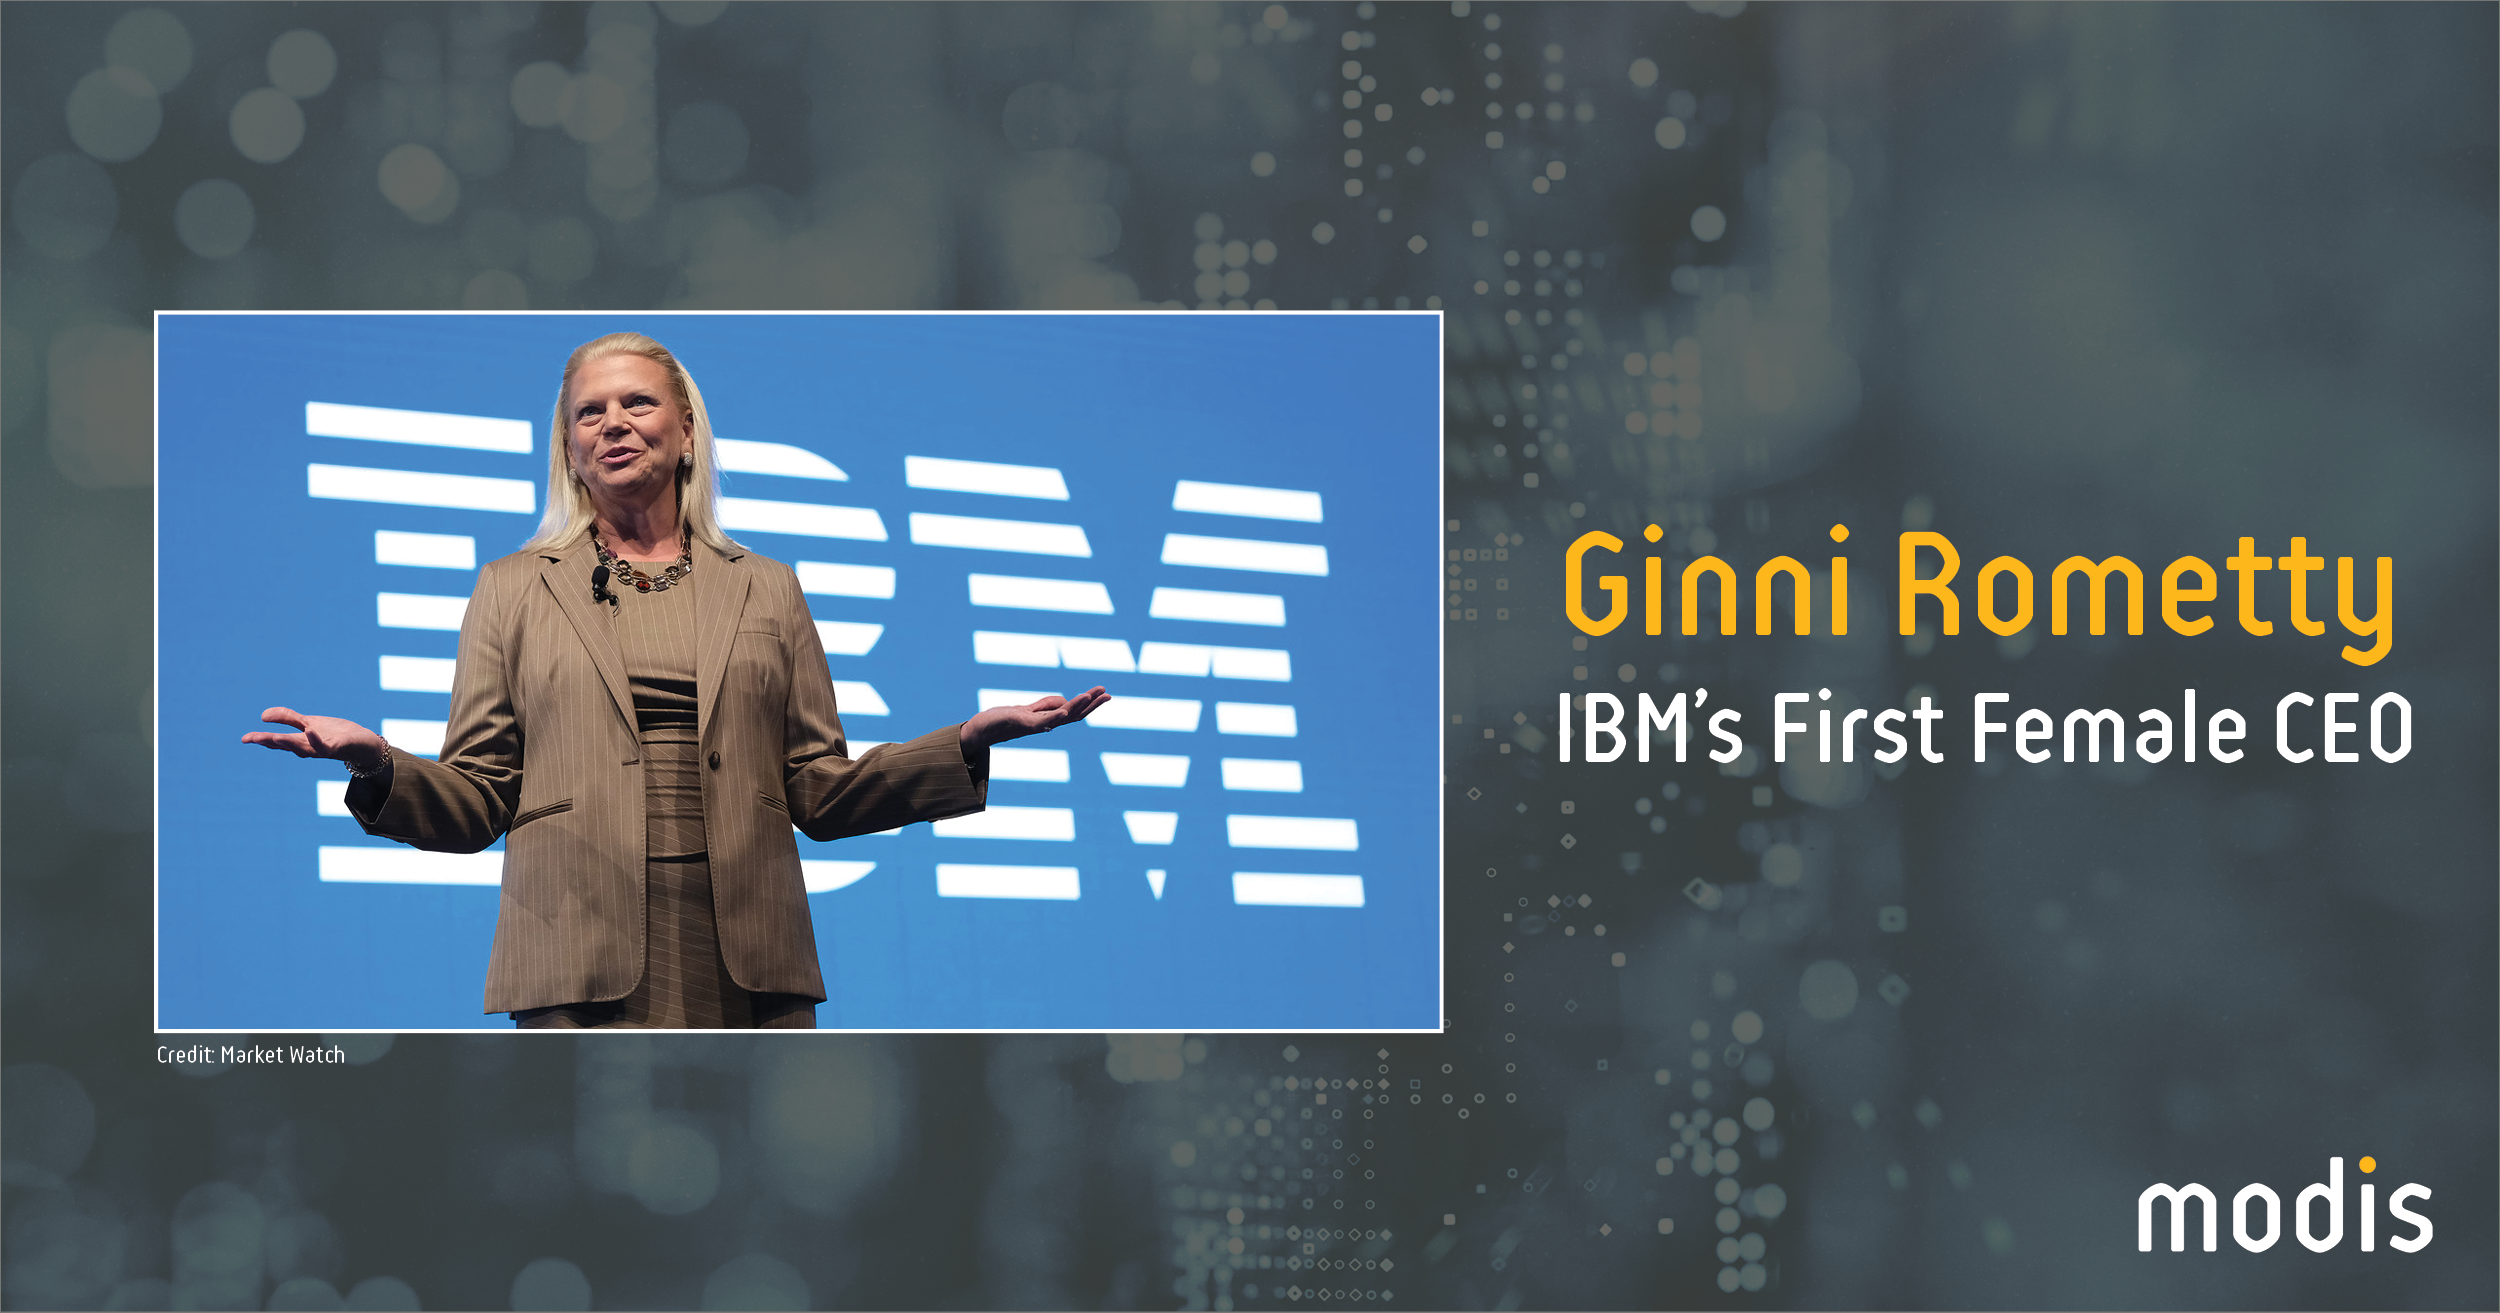 Ginni Rometty is IBM's first female CEO